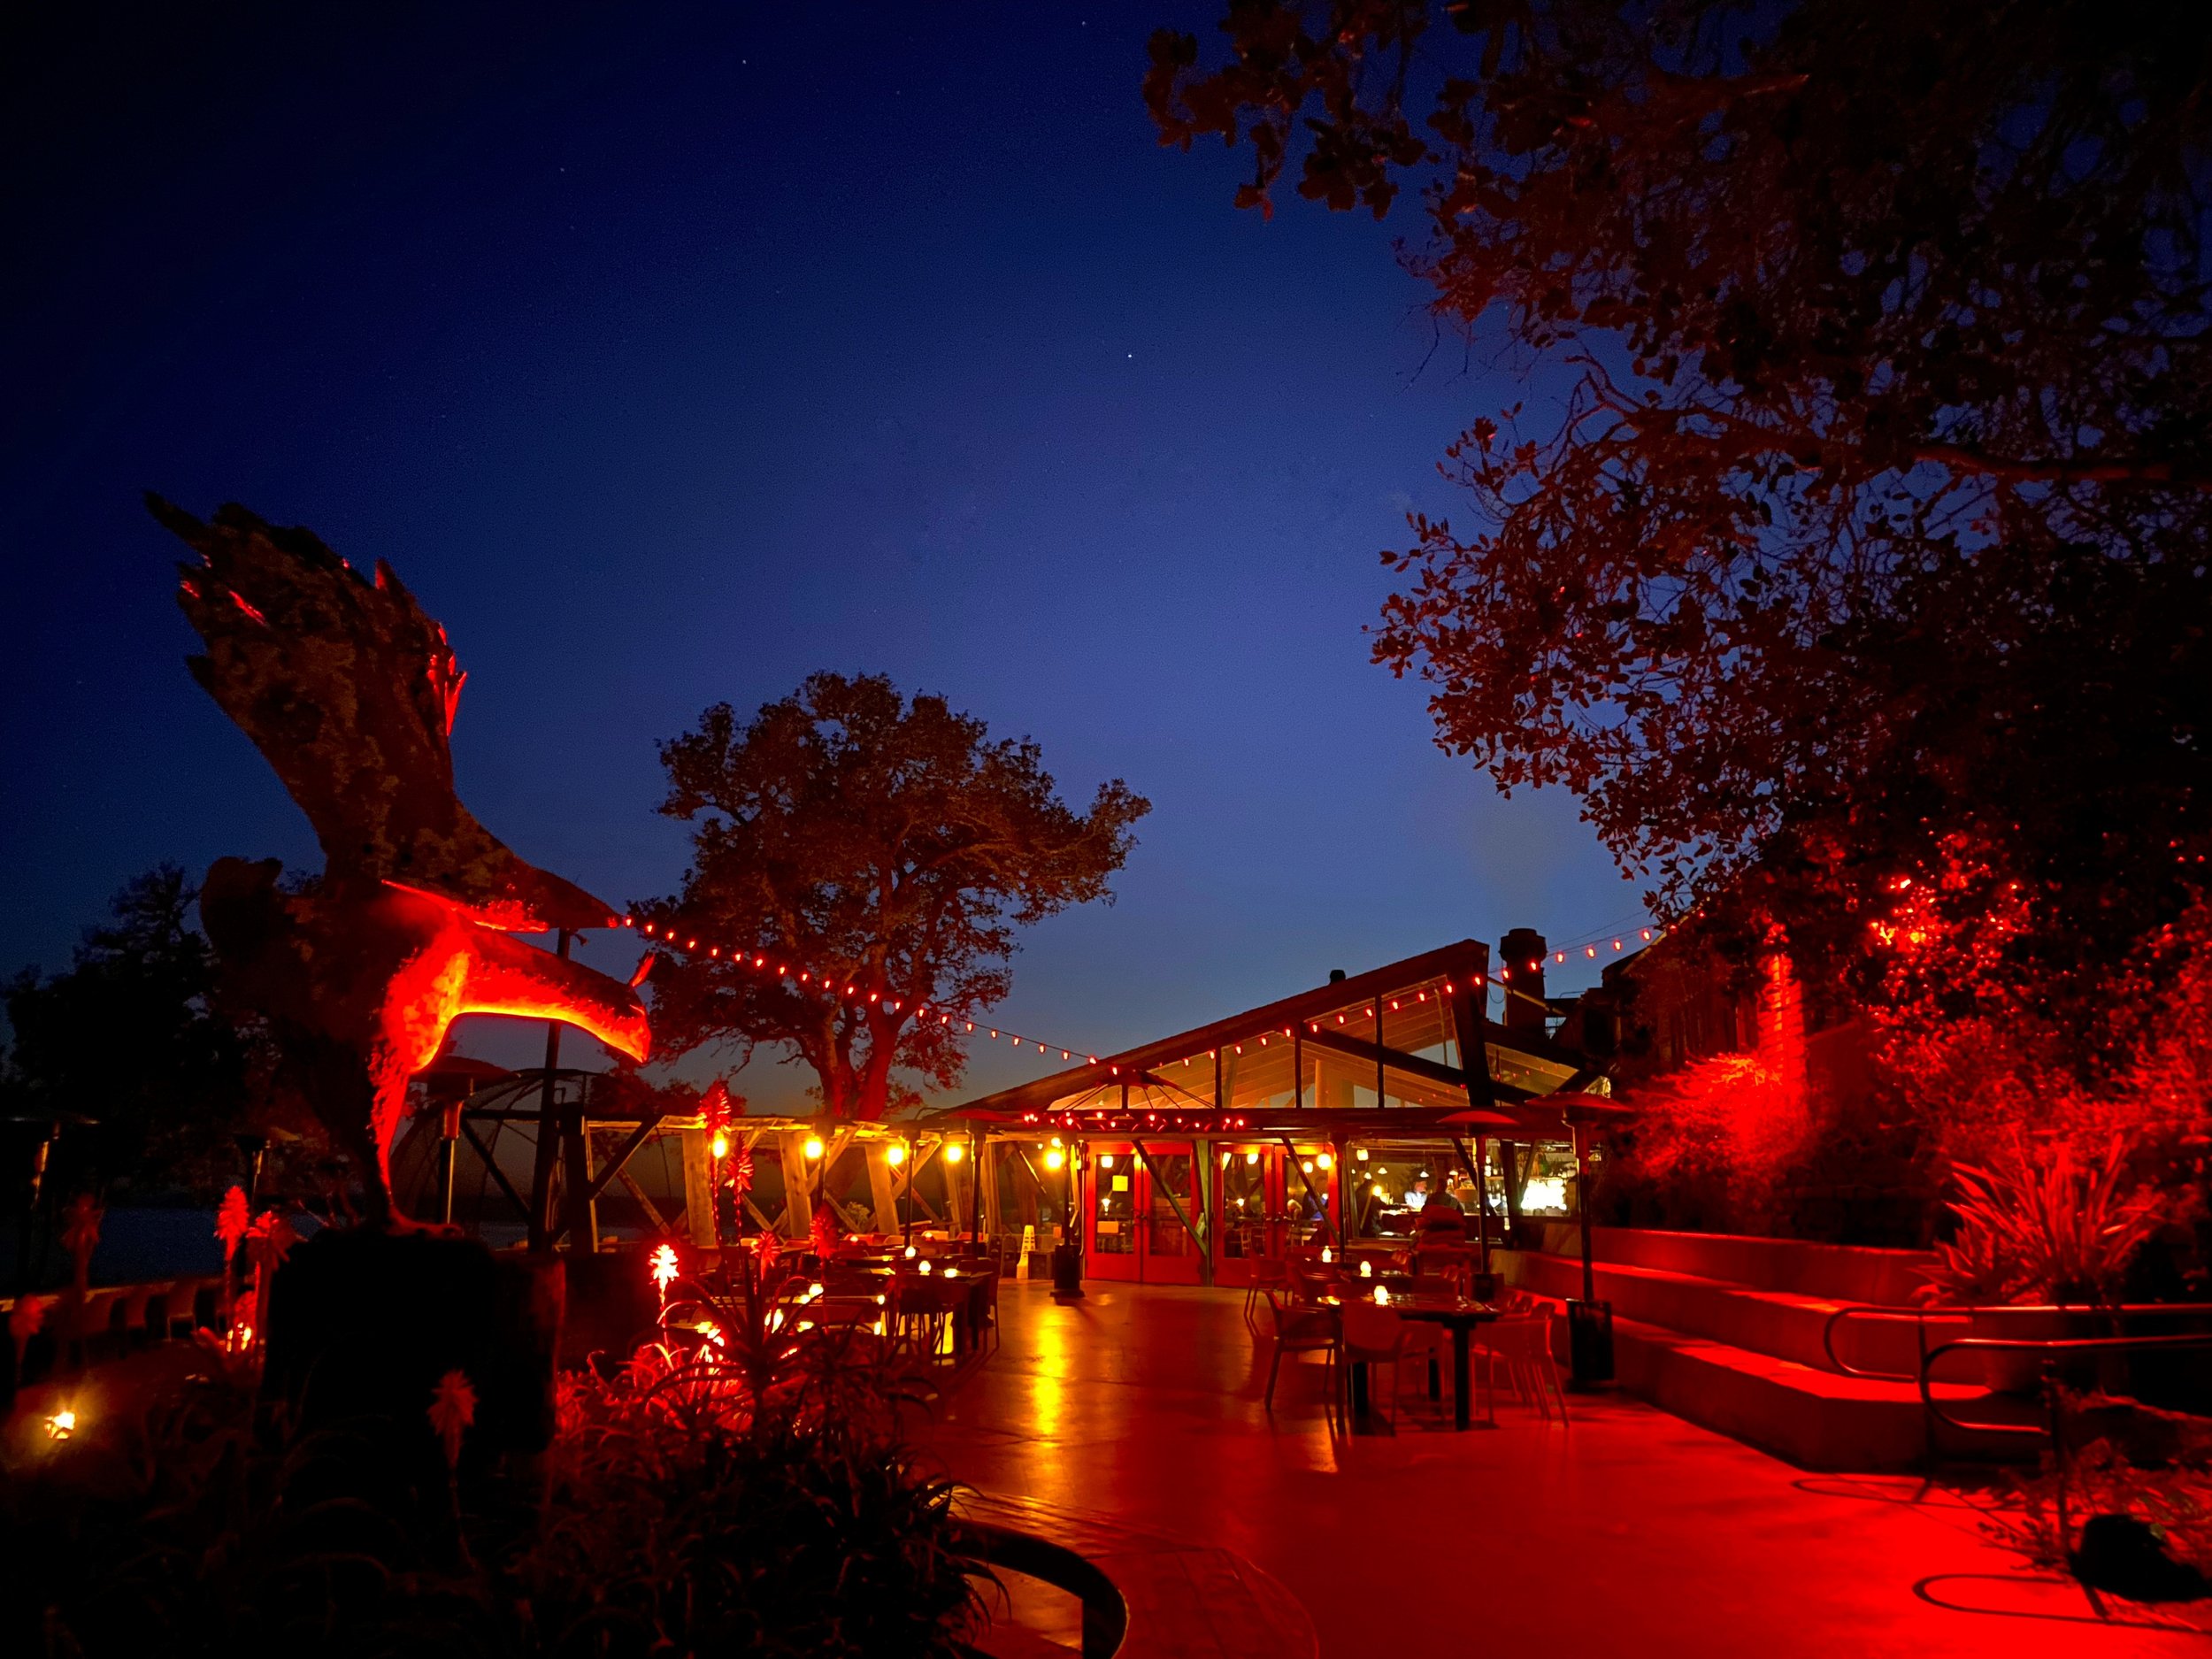 Night view of the patio at Nepenthe restaurant in Big Sur, California